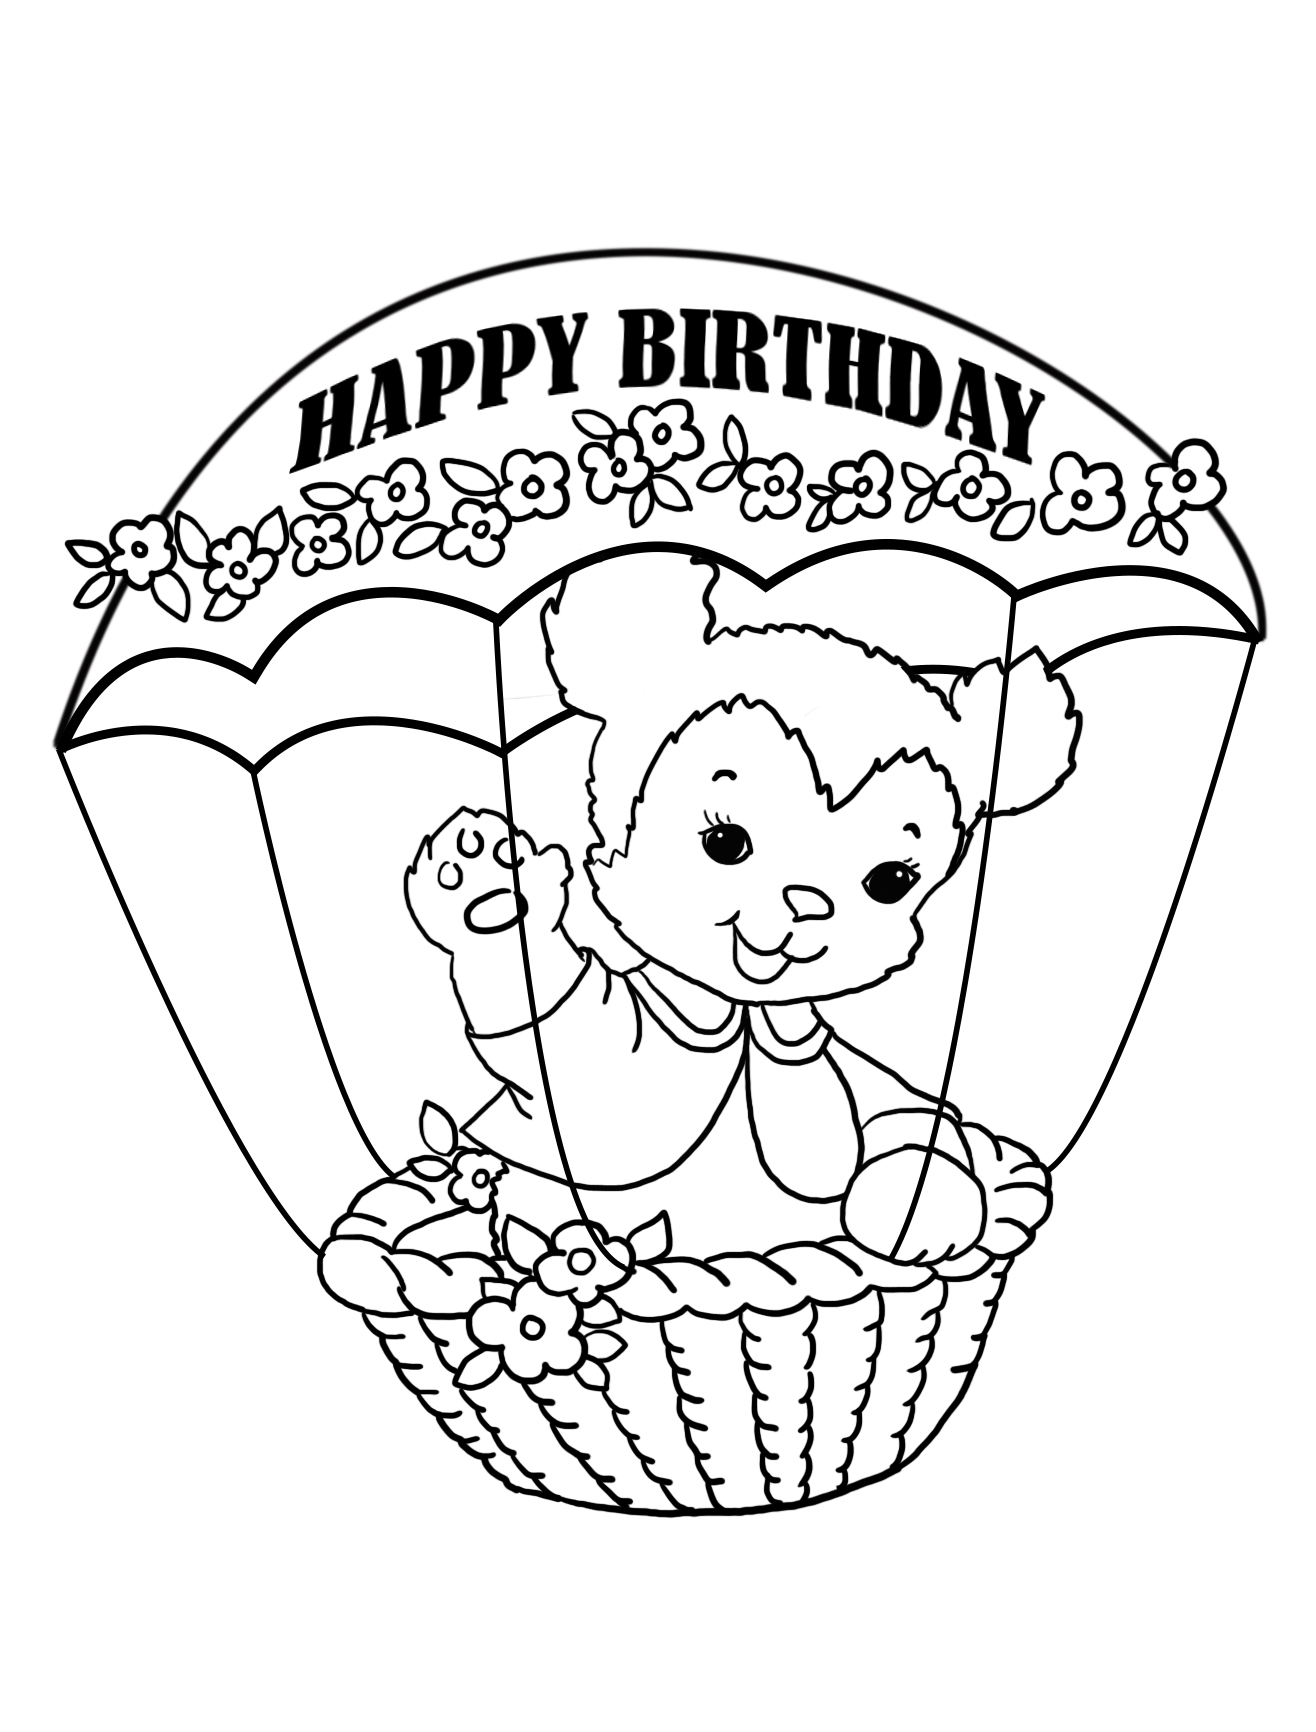 Download Birthday Coloring Pages